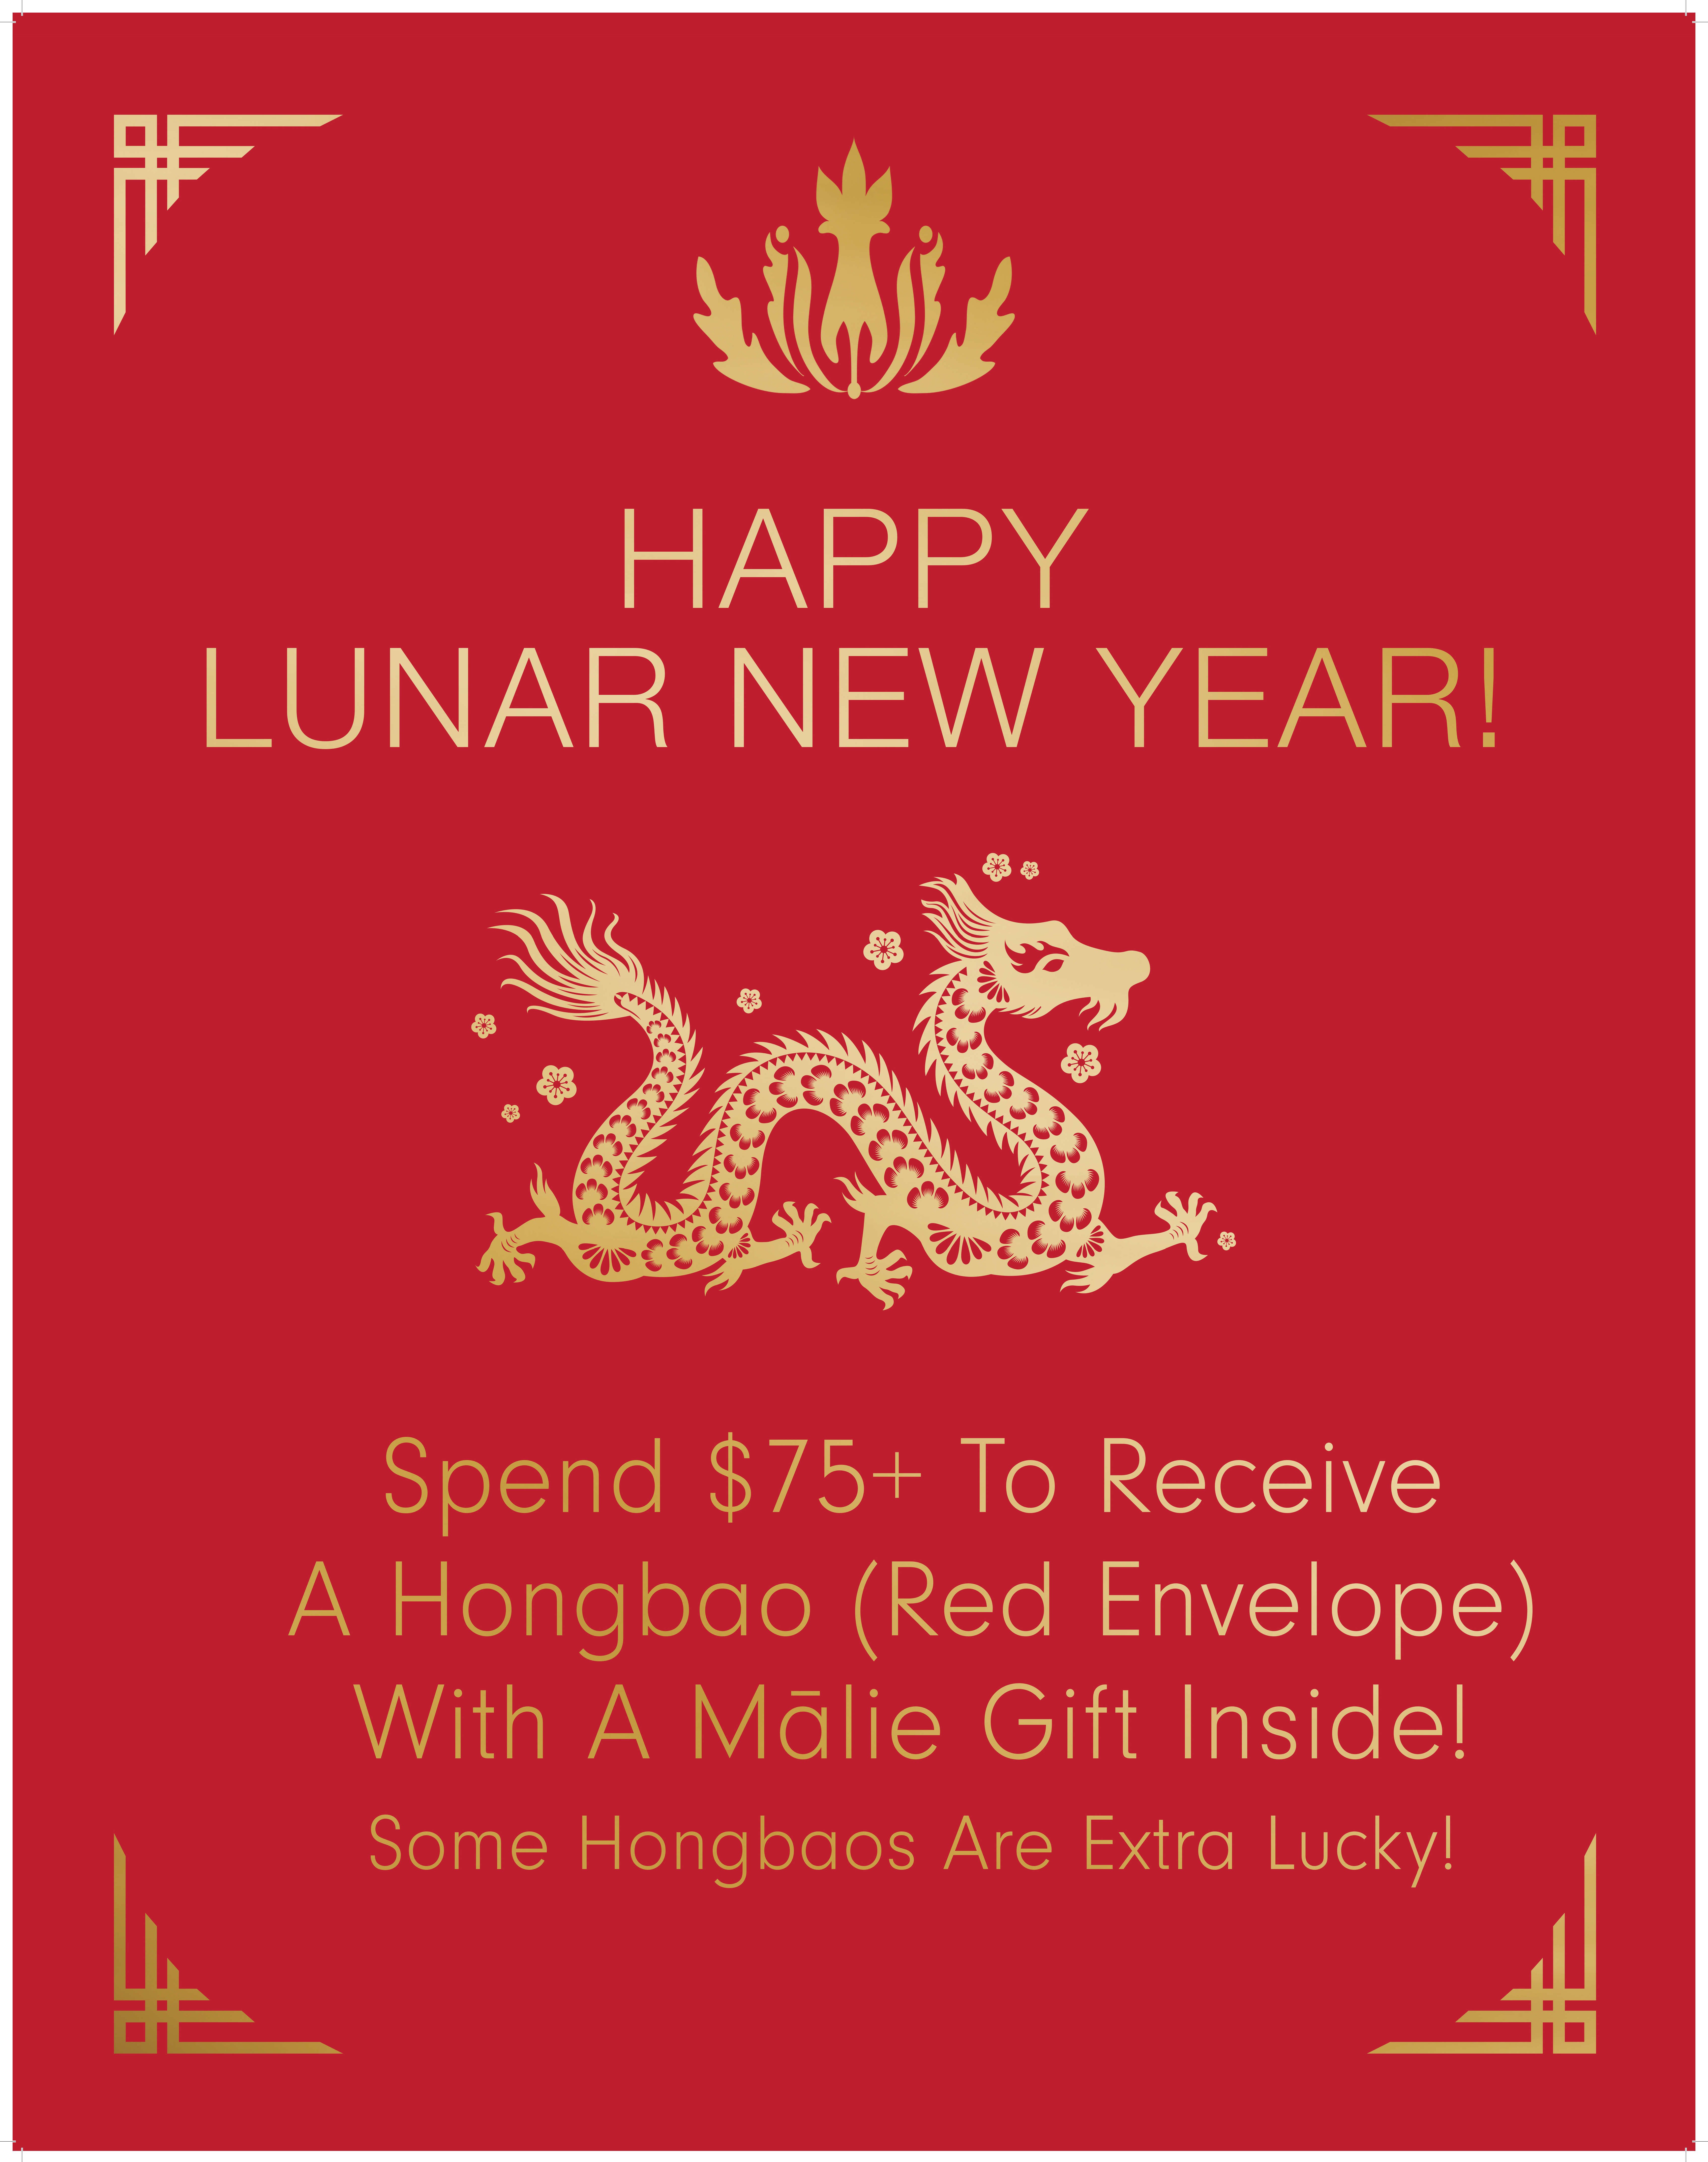 Spend $75+ and receive a hongbao from mālie